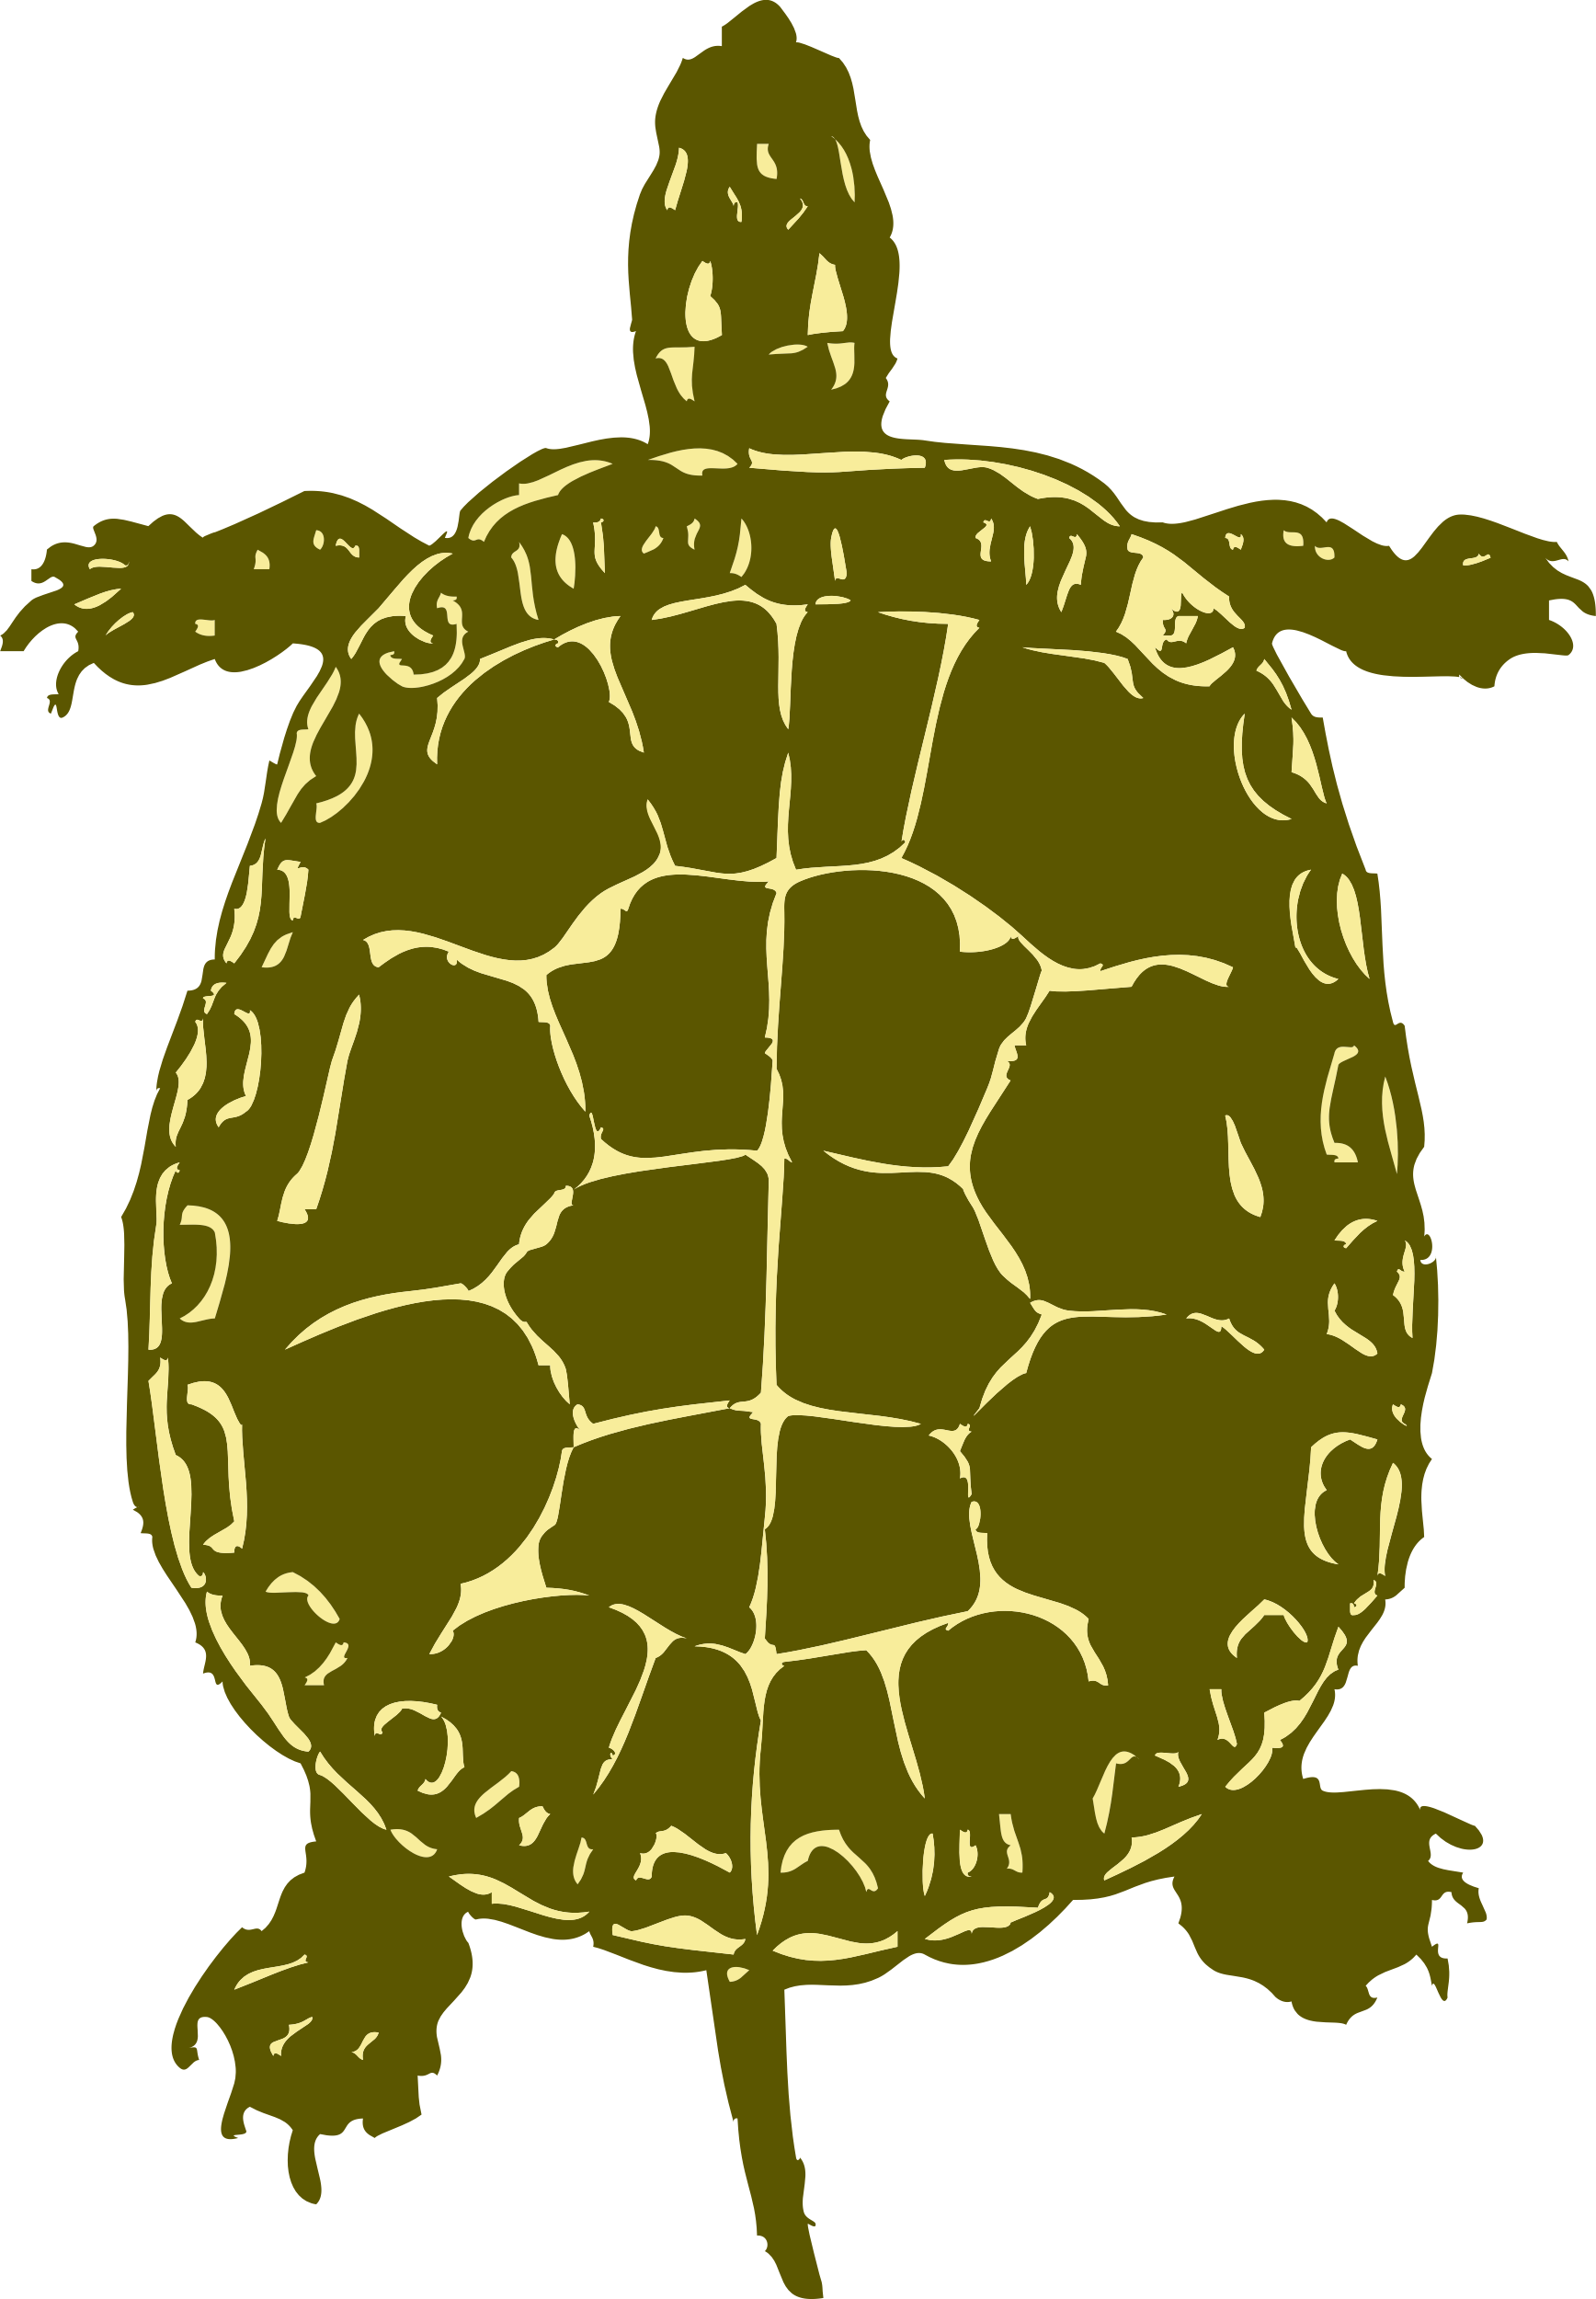 Sea Turtle Clipart Snapping Turtle - Turtle Bird Eye View (1736x2500)